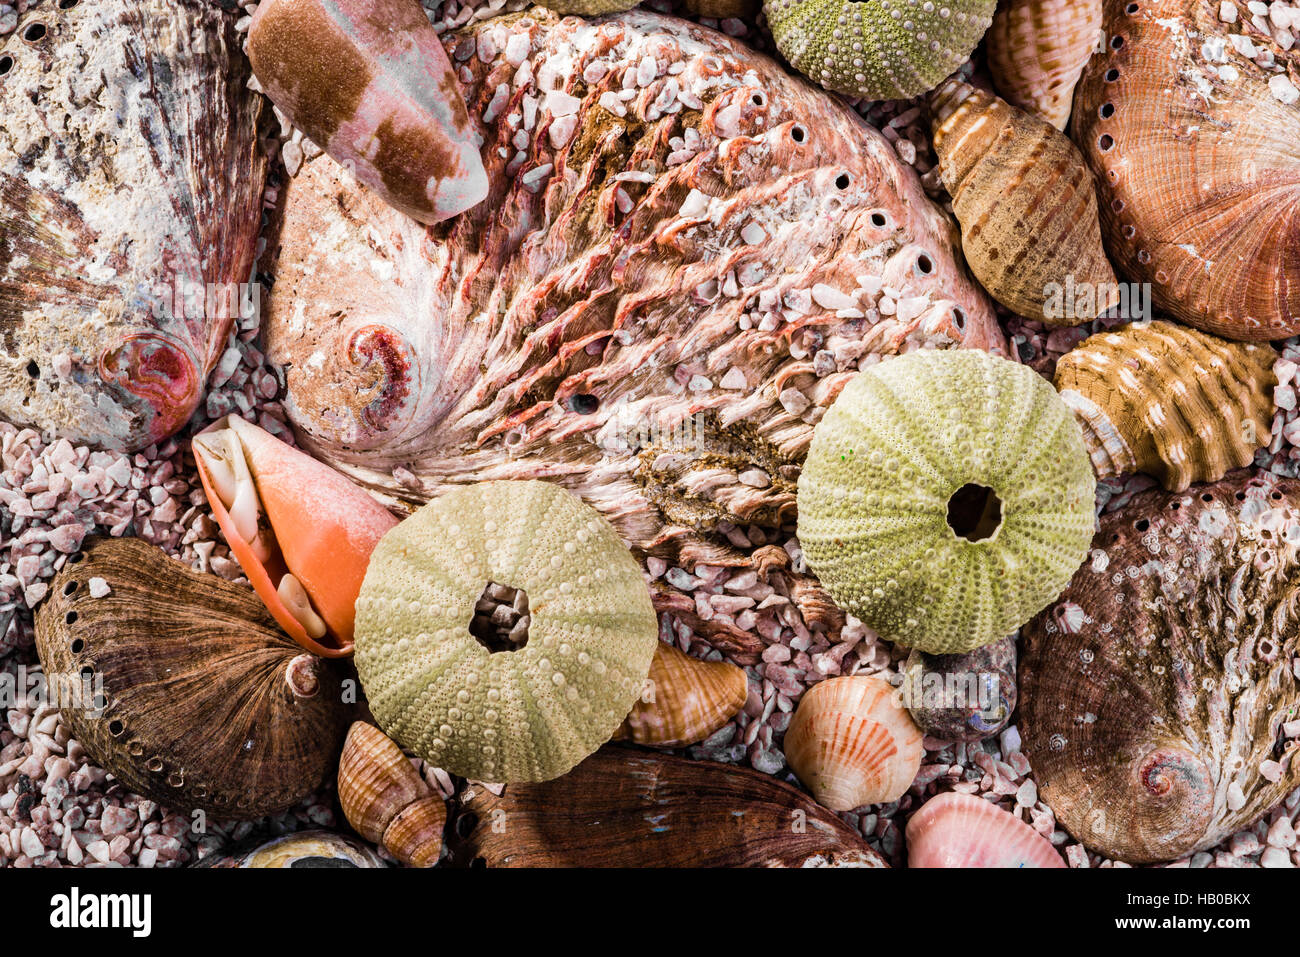 Up close view of a mix of seashells Stock Photo